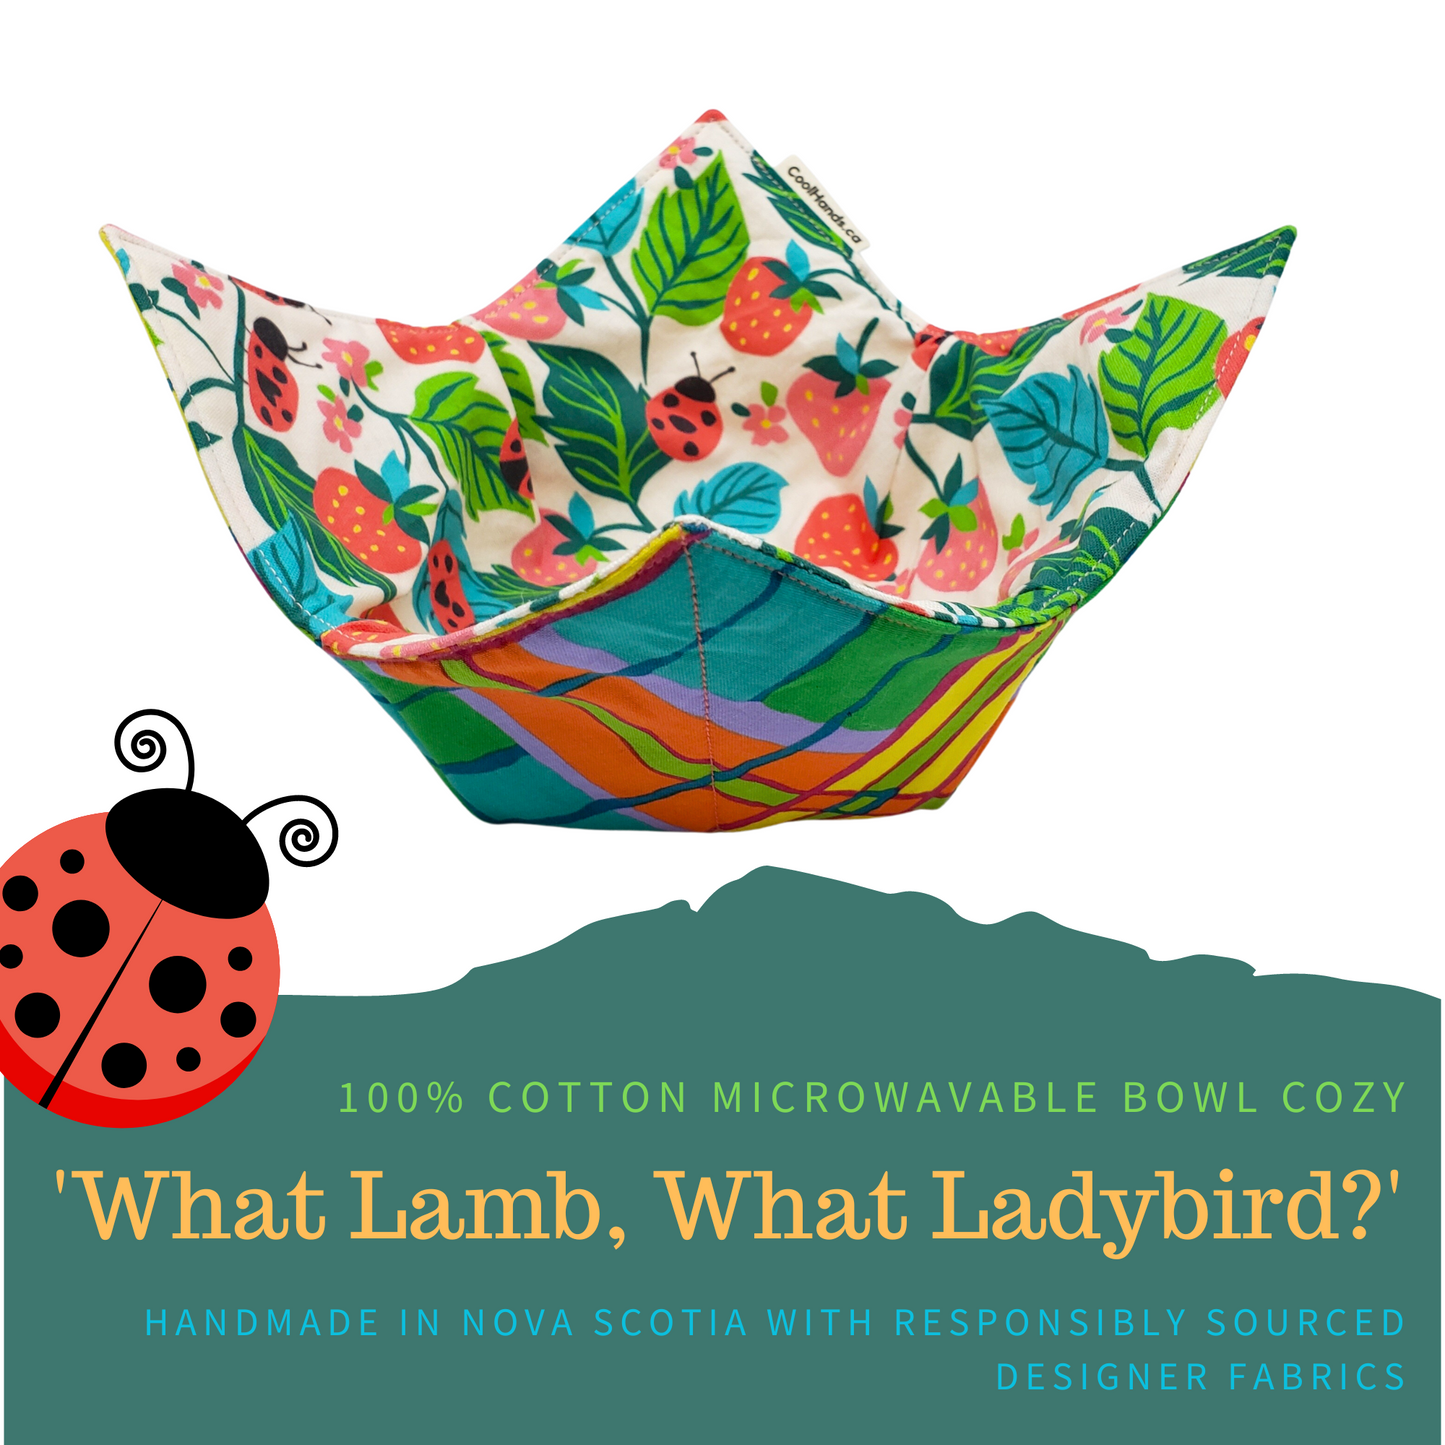 100% Cotton Microwavable Bowl Cozy - "What Lamb, What Ladybird!"